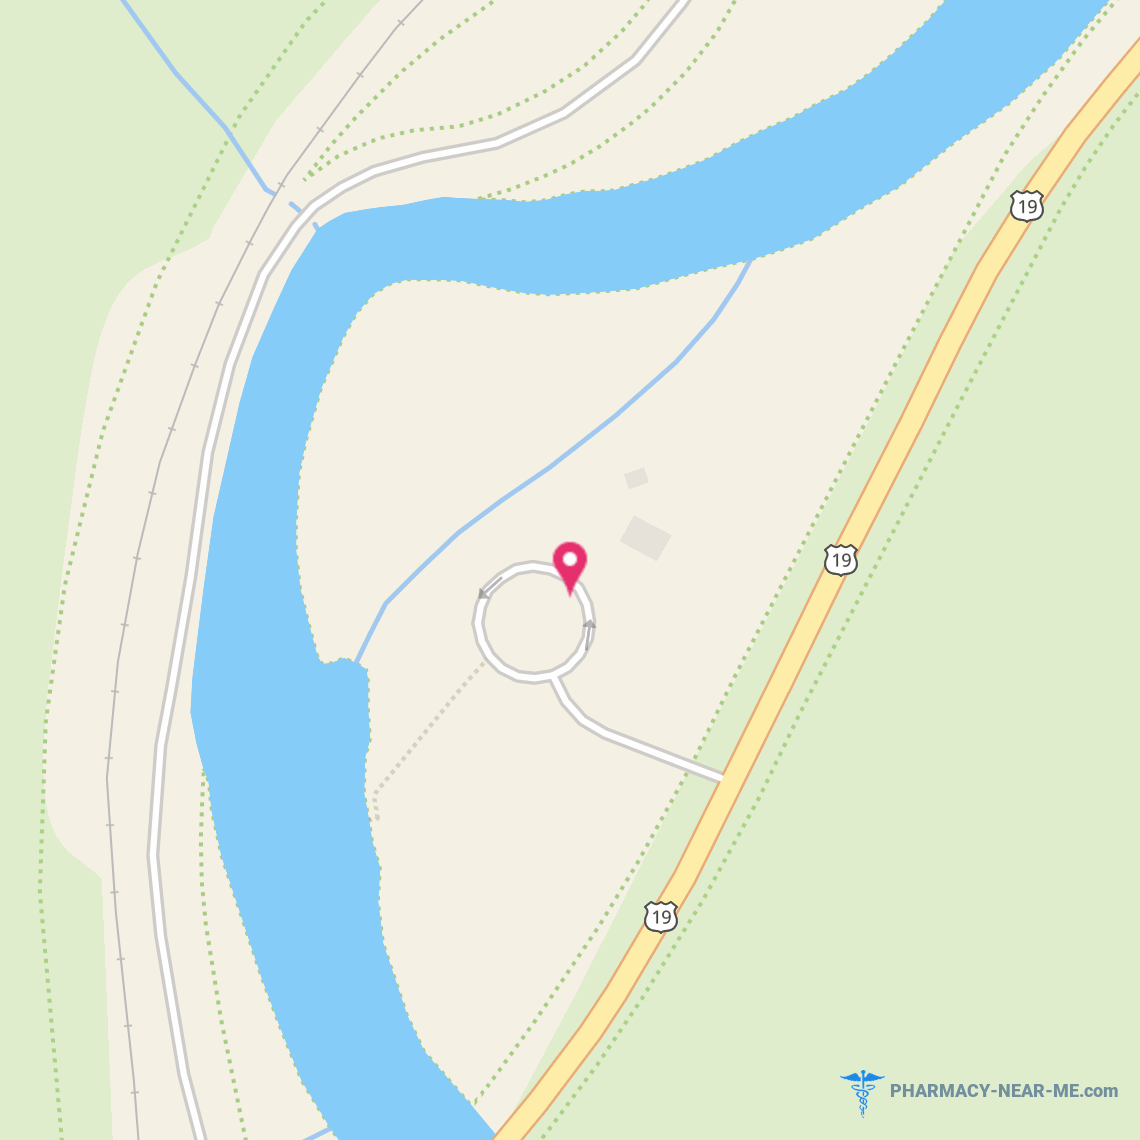 KERR DRUG - Pharmacy Hours, Phone, Reviews & Information: US Route 19, Bryson City, North Carolina 28713, United States